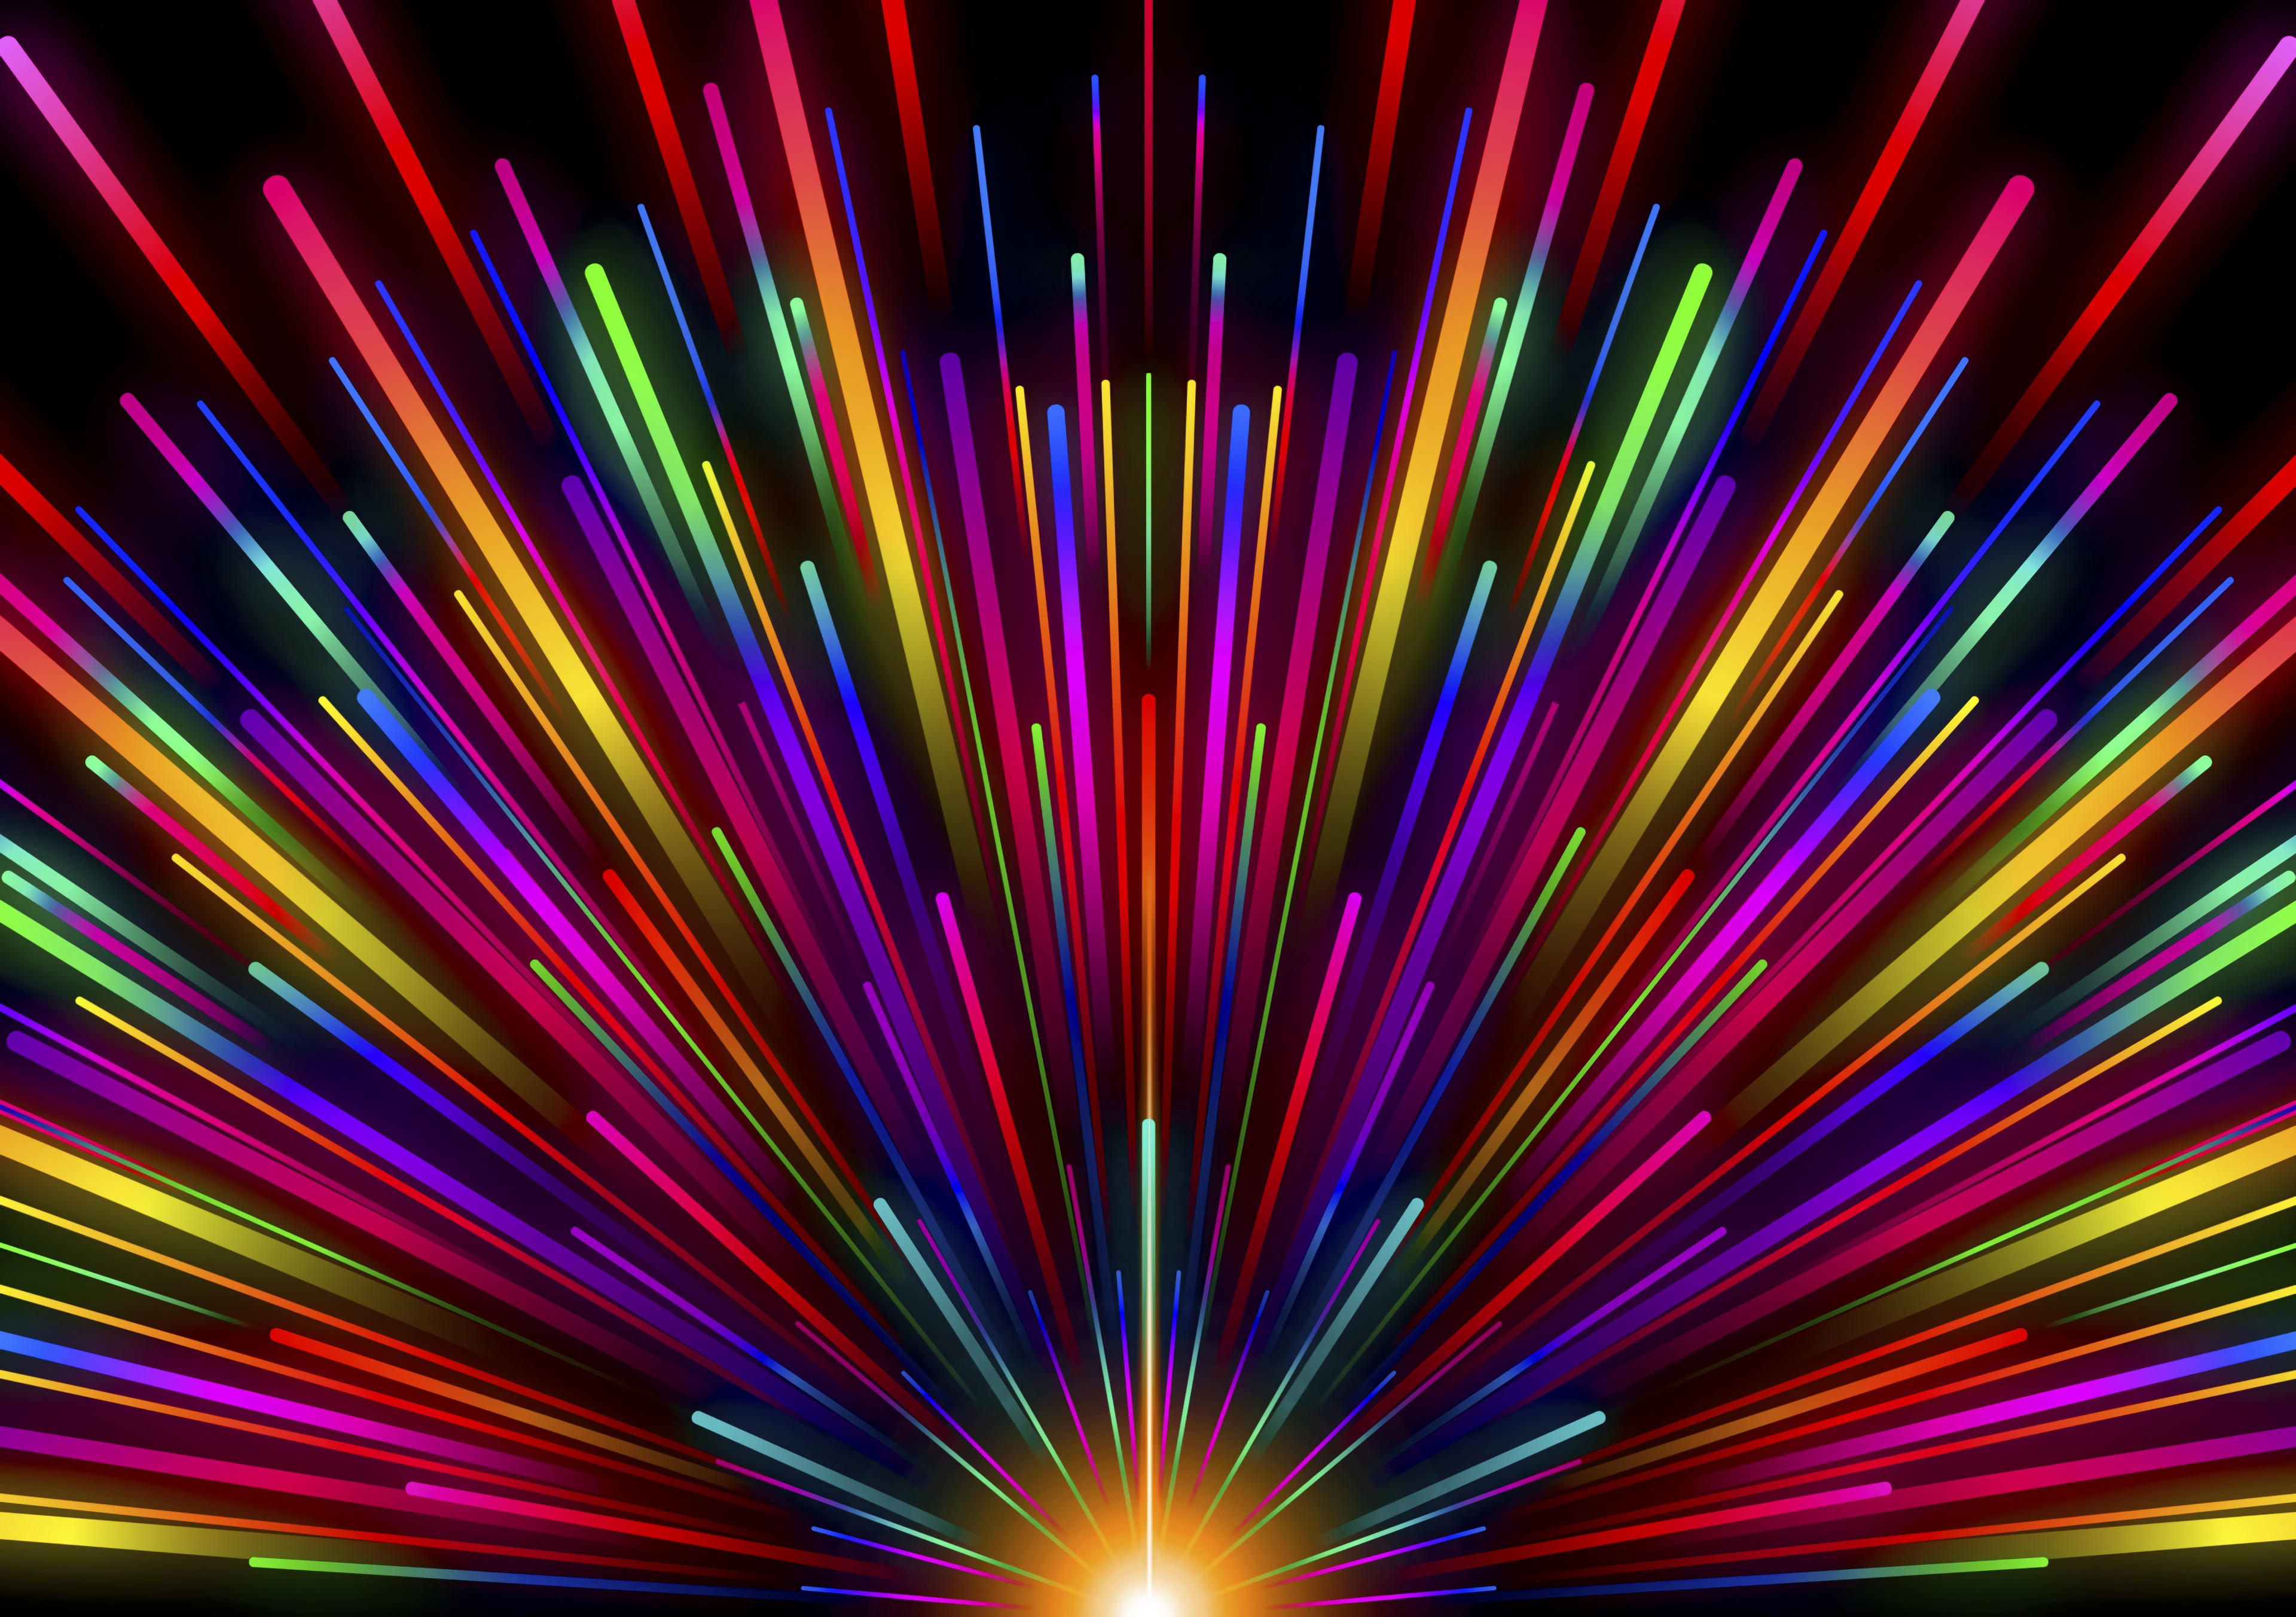 glow, multicolored, rainbow, abstract, rays, beams, motley, stripes, streaks cellphone